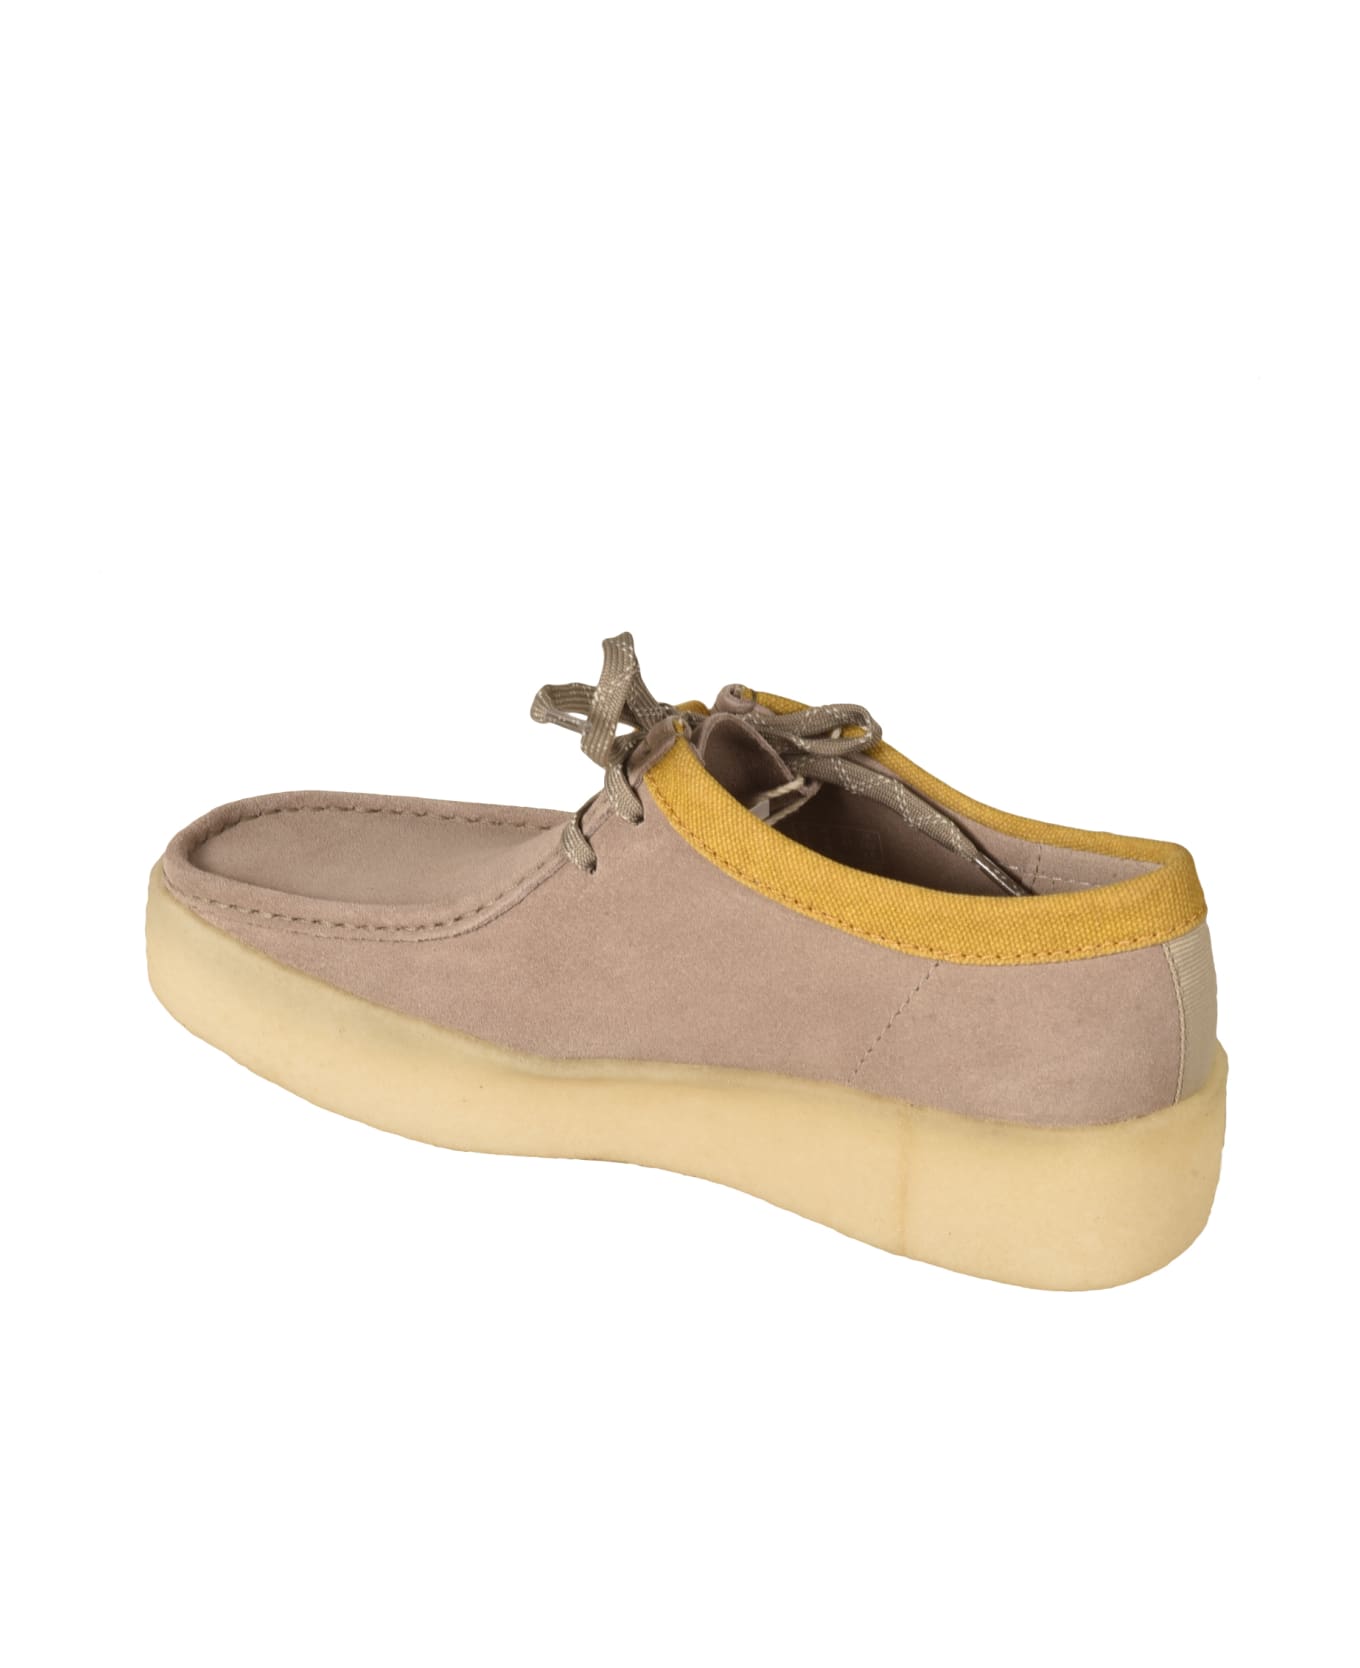 Clarks Wallabee Cup Ankle Boots - Stone